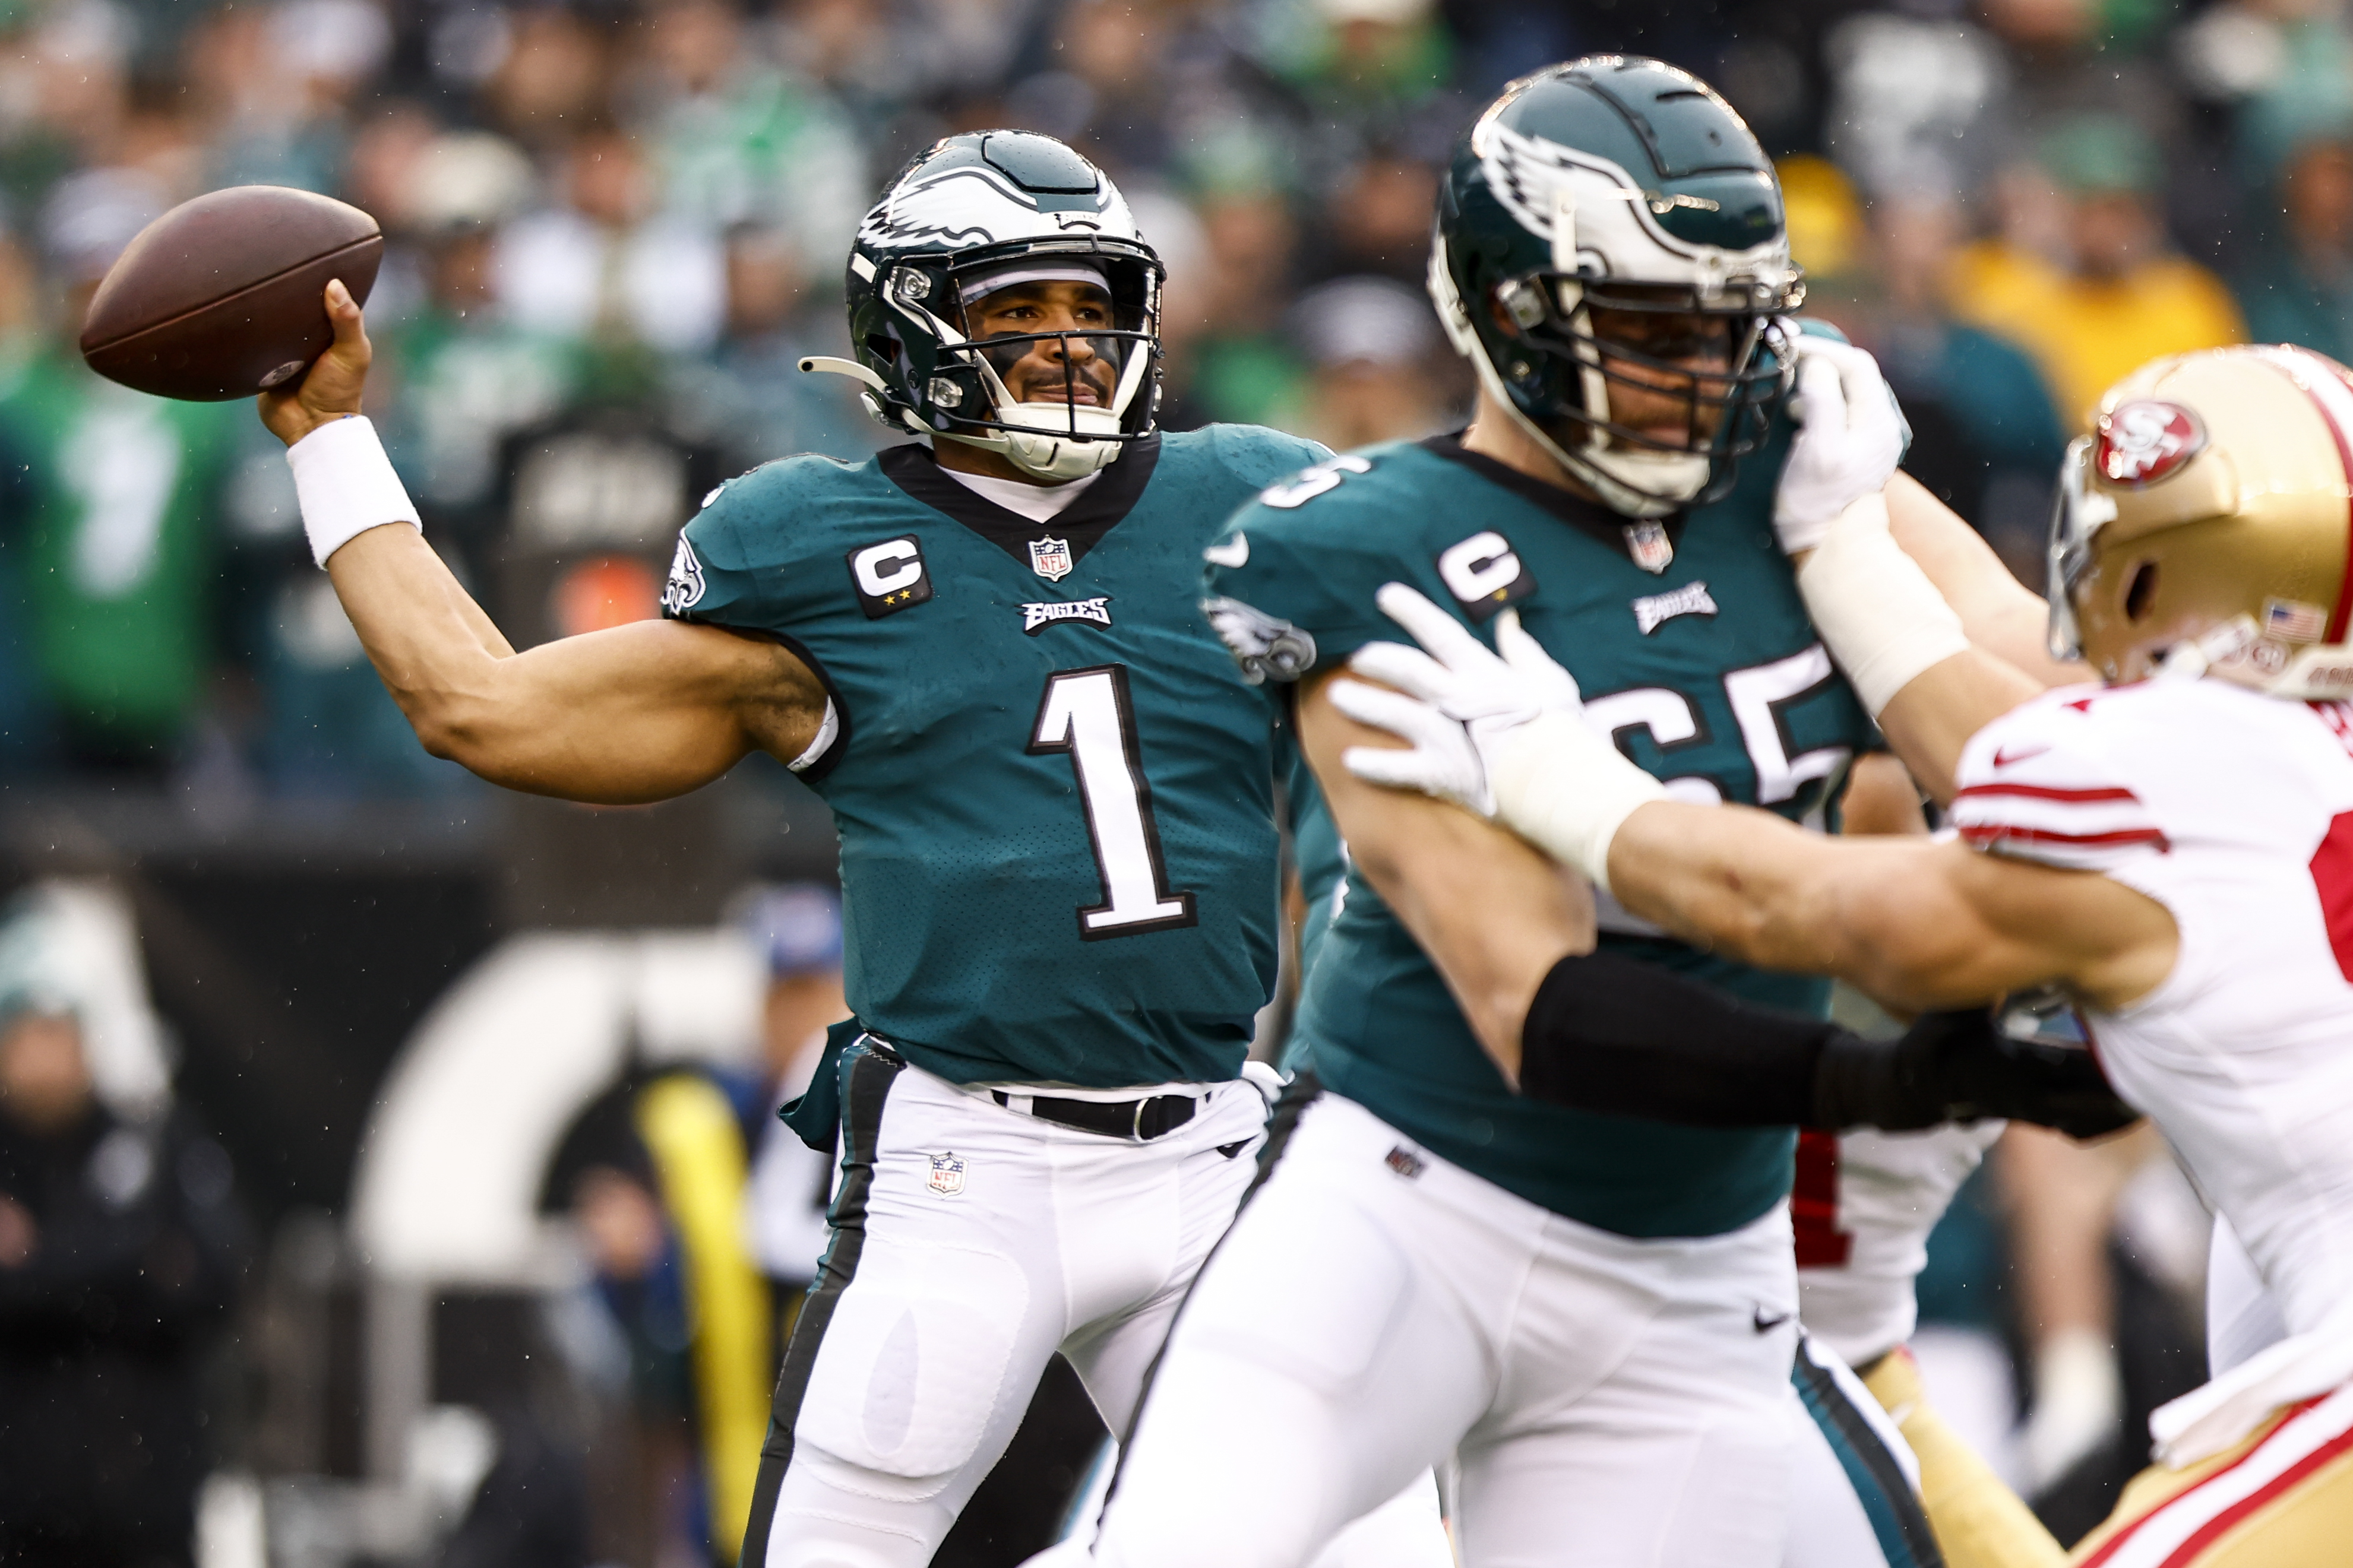 Jalen Hurts of the Philadelphia Eagles throws a pass during the first quarter of the NFC Championship NFL football game against the San Francisco 49ers at Lincoln Financial Field on January 29, 2023 in Philadelphia, Pennsylvania.